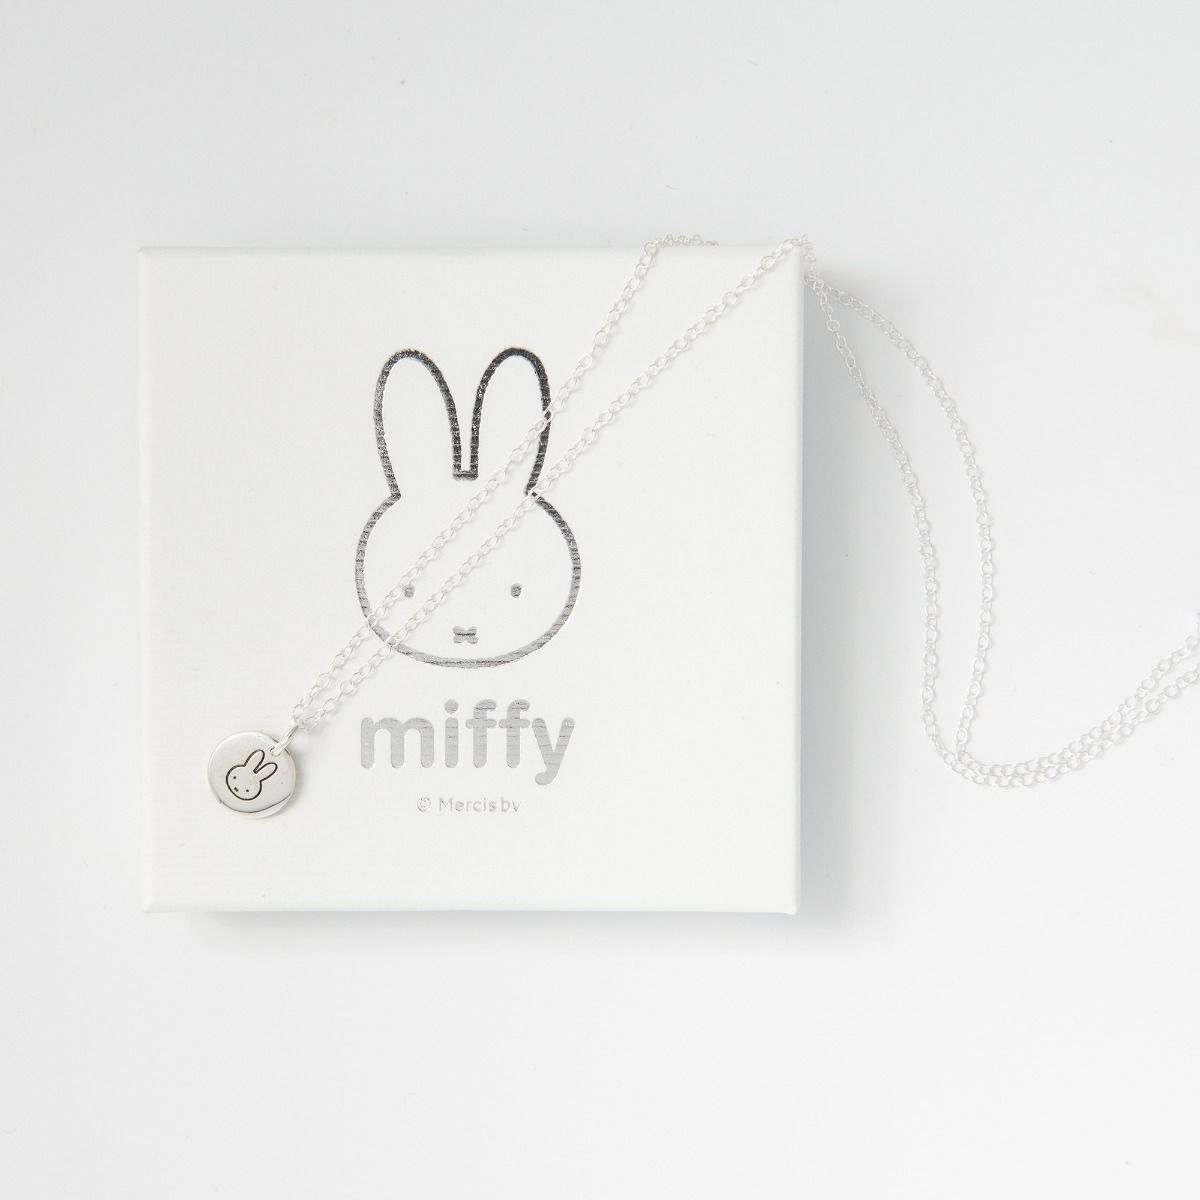 Miffy Small Disc Charm Necklace Sterling Silver